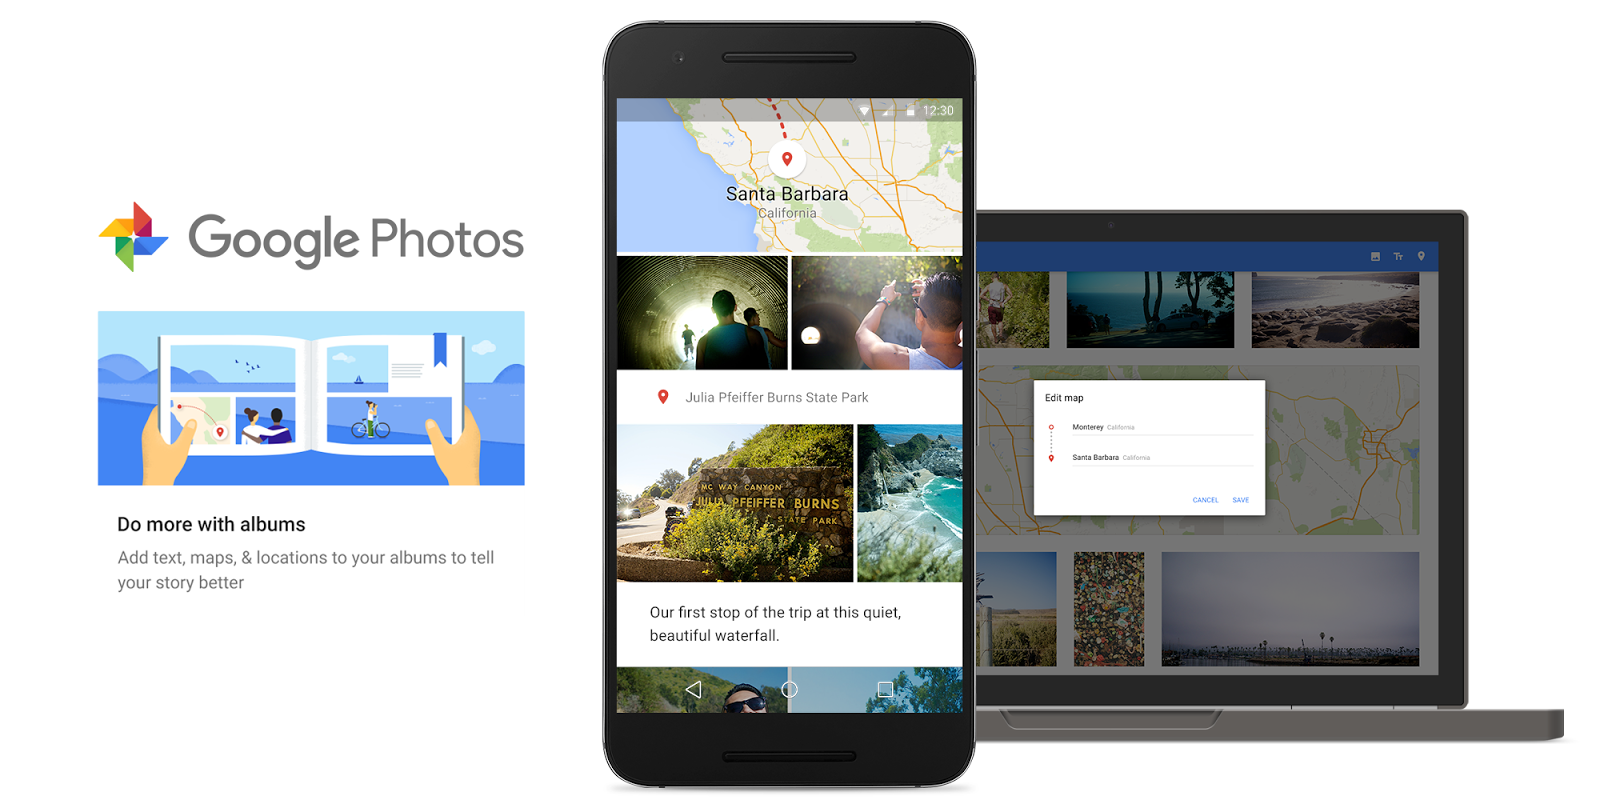 How To Delete Shared Photos On Google Photos